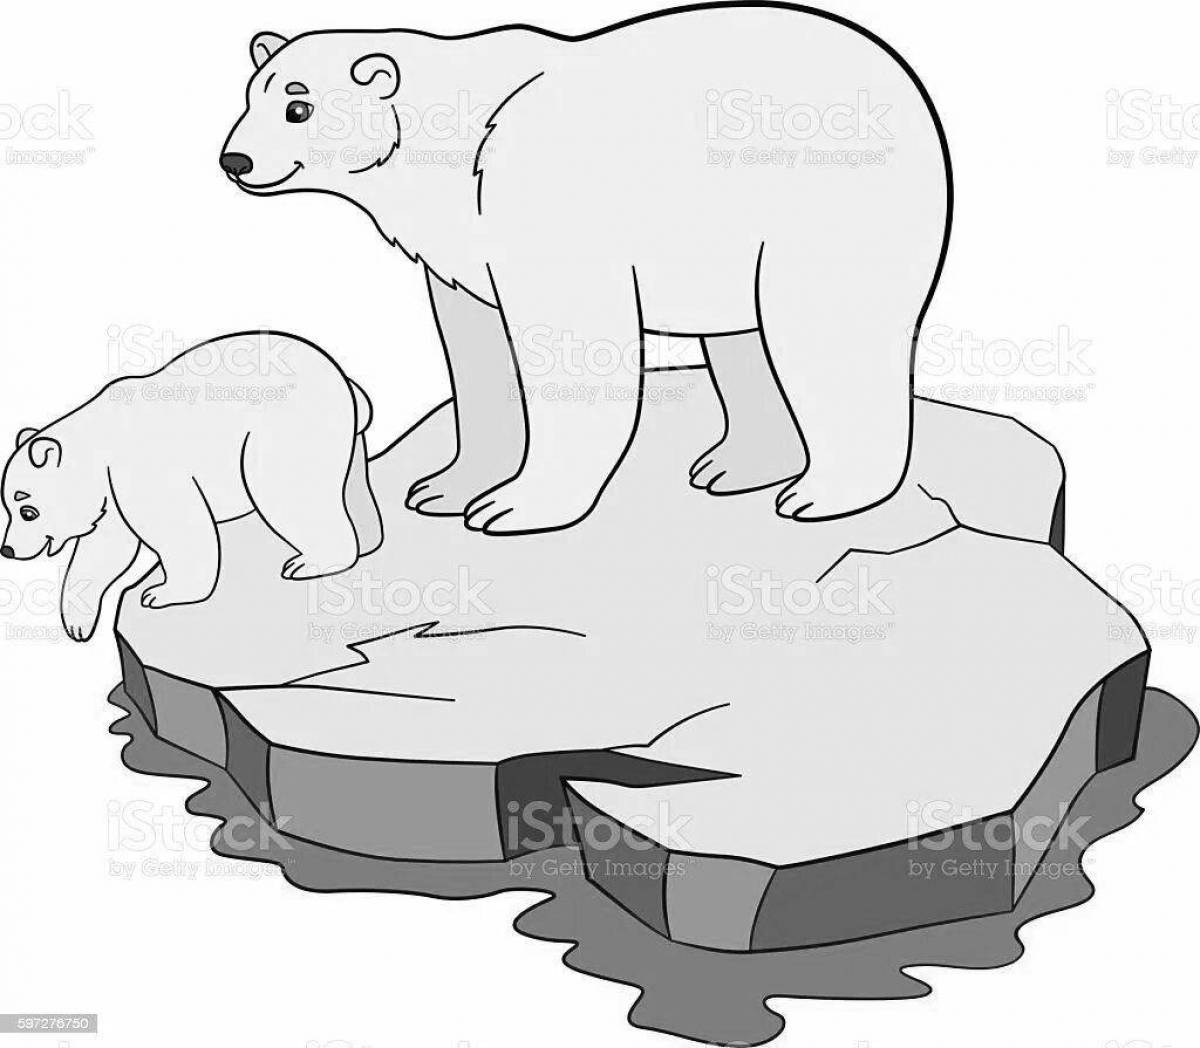 Amazing ice floe coloring page for kids